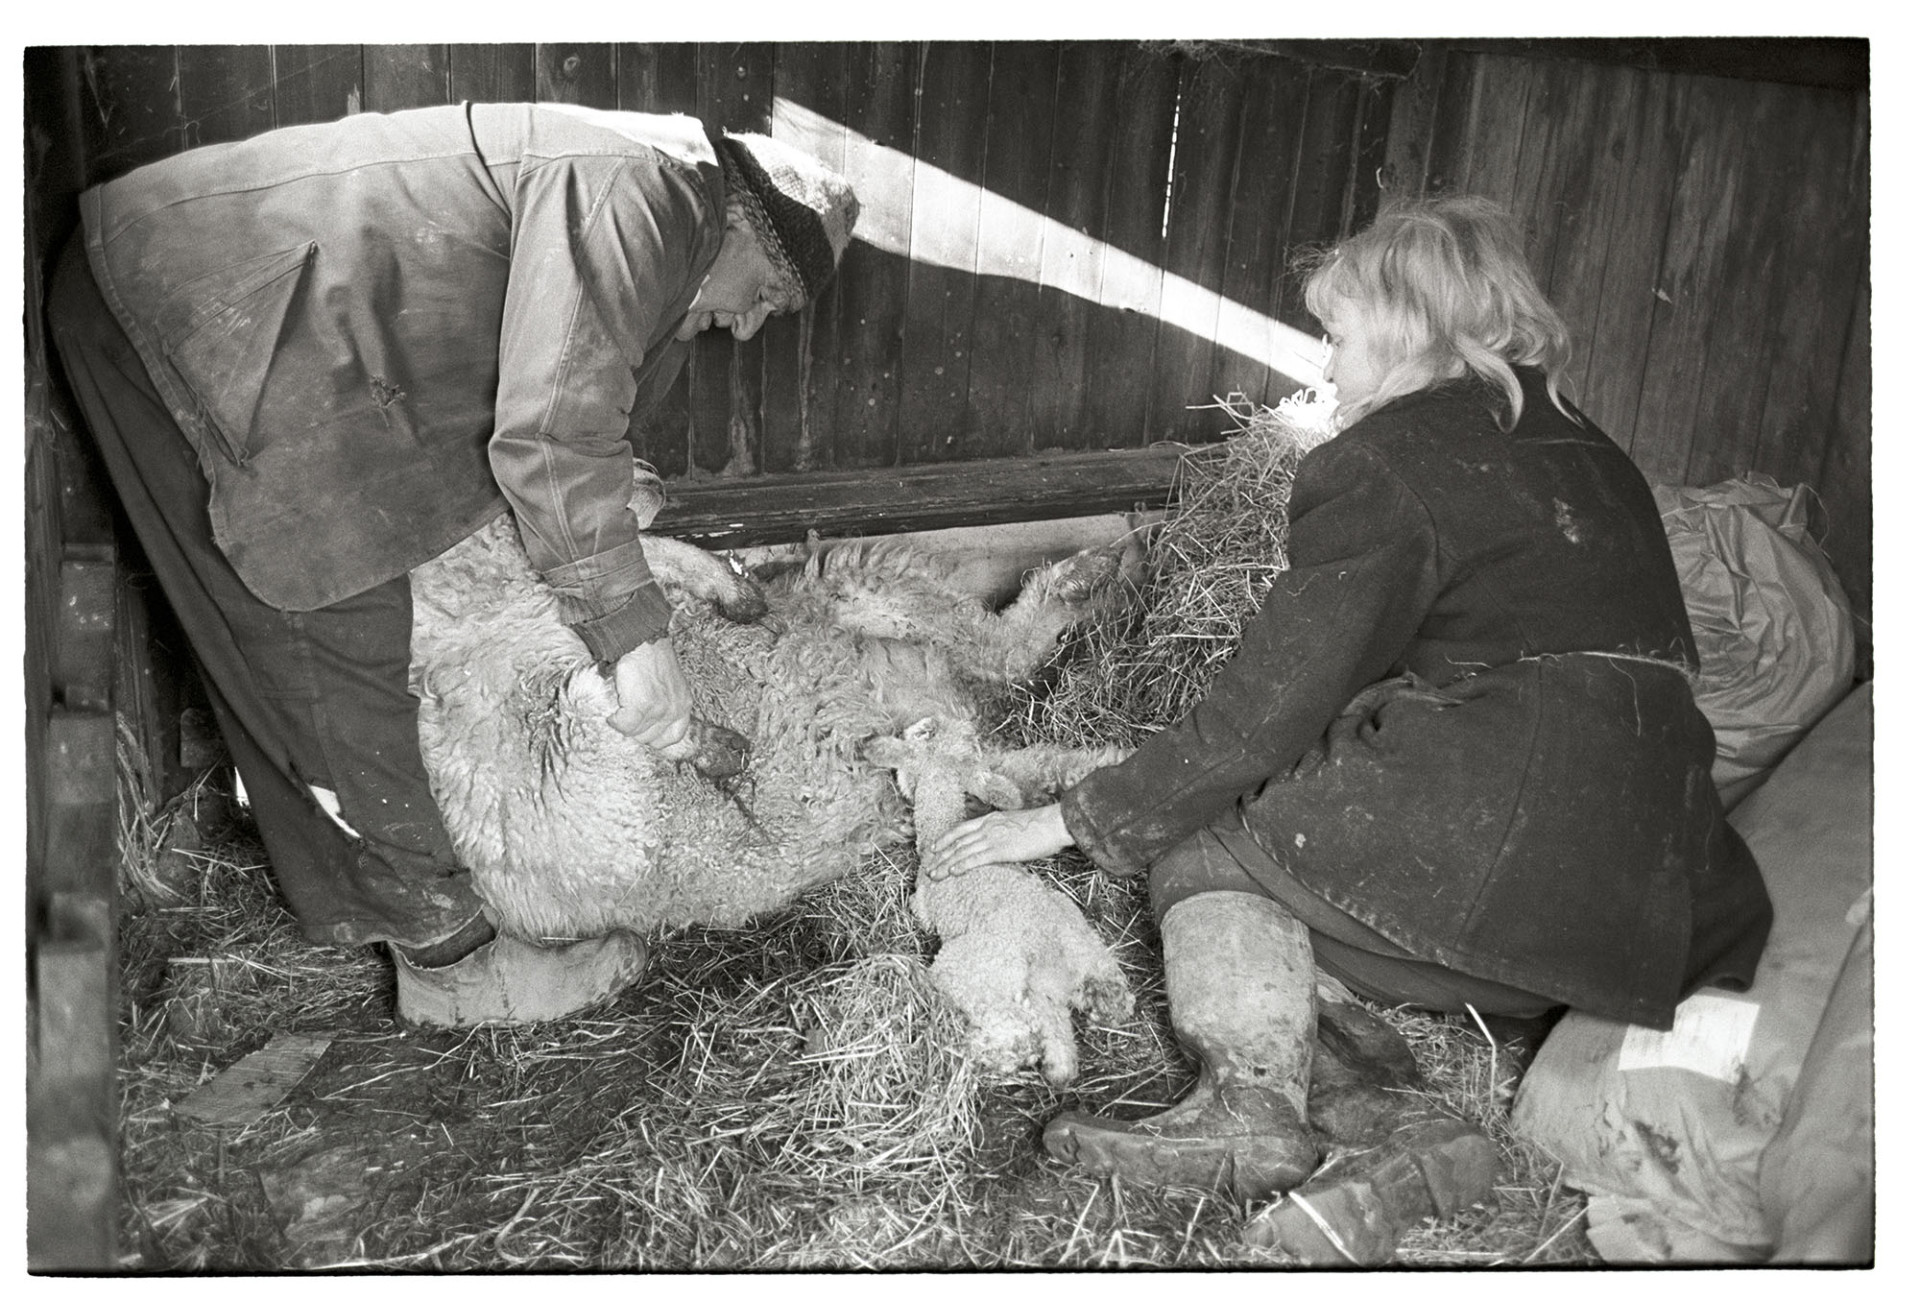 Farmers trying to make lamb take to ewe in shed. 
[Jo Curzon and Archie Parkhouse trying to make a lamb suckle from a ewe in a shed at Millhams, Dolton.]